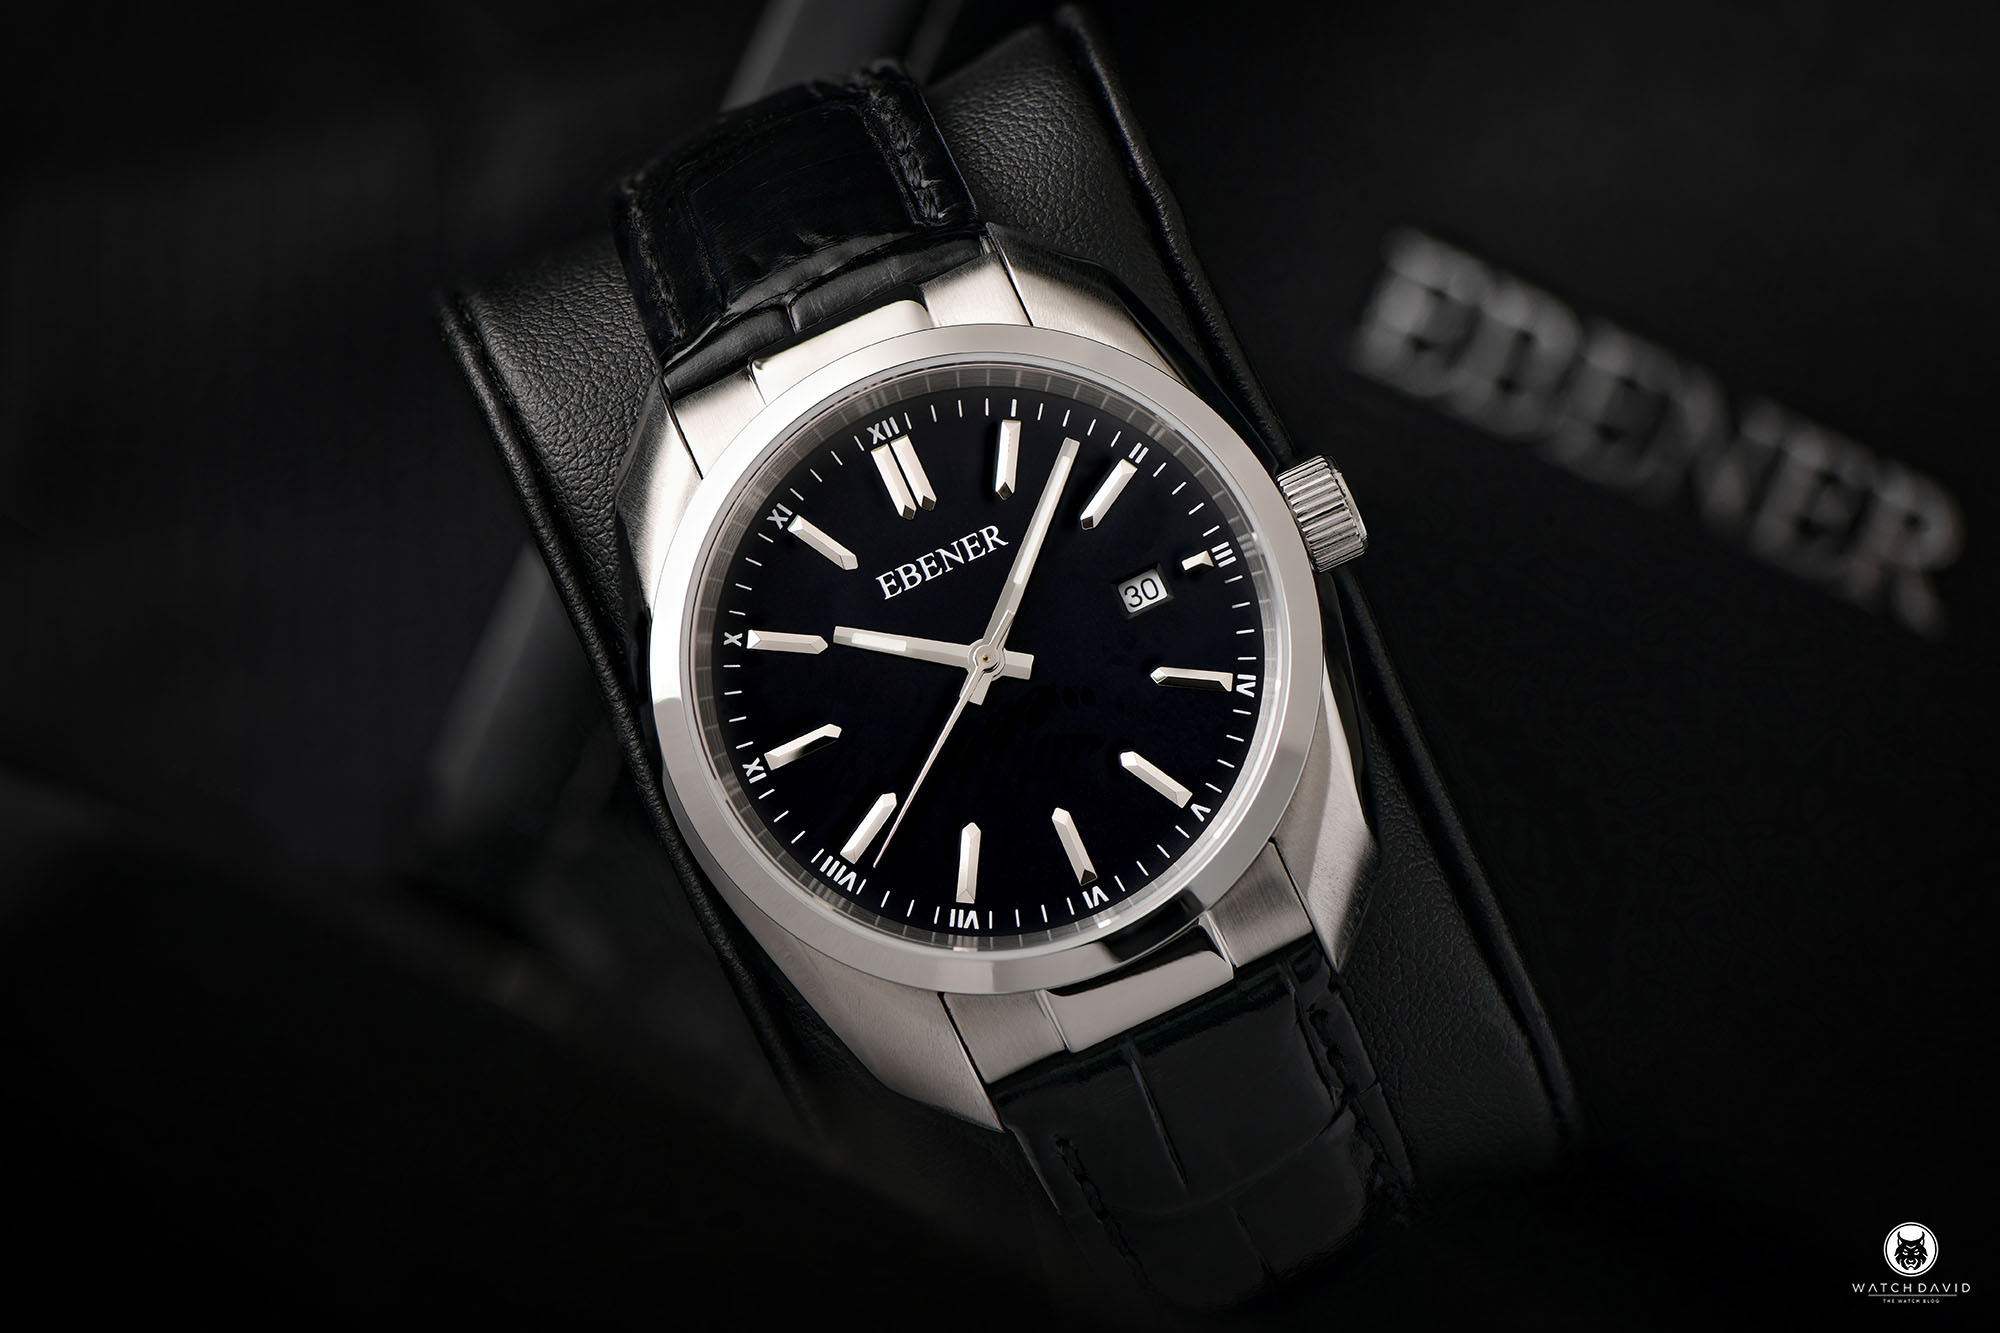 Ebener The First Black Limited Edition